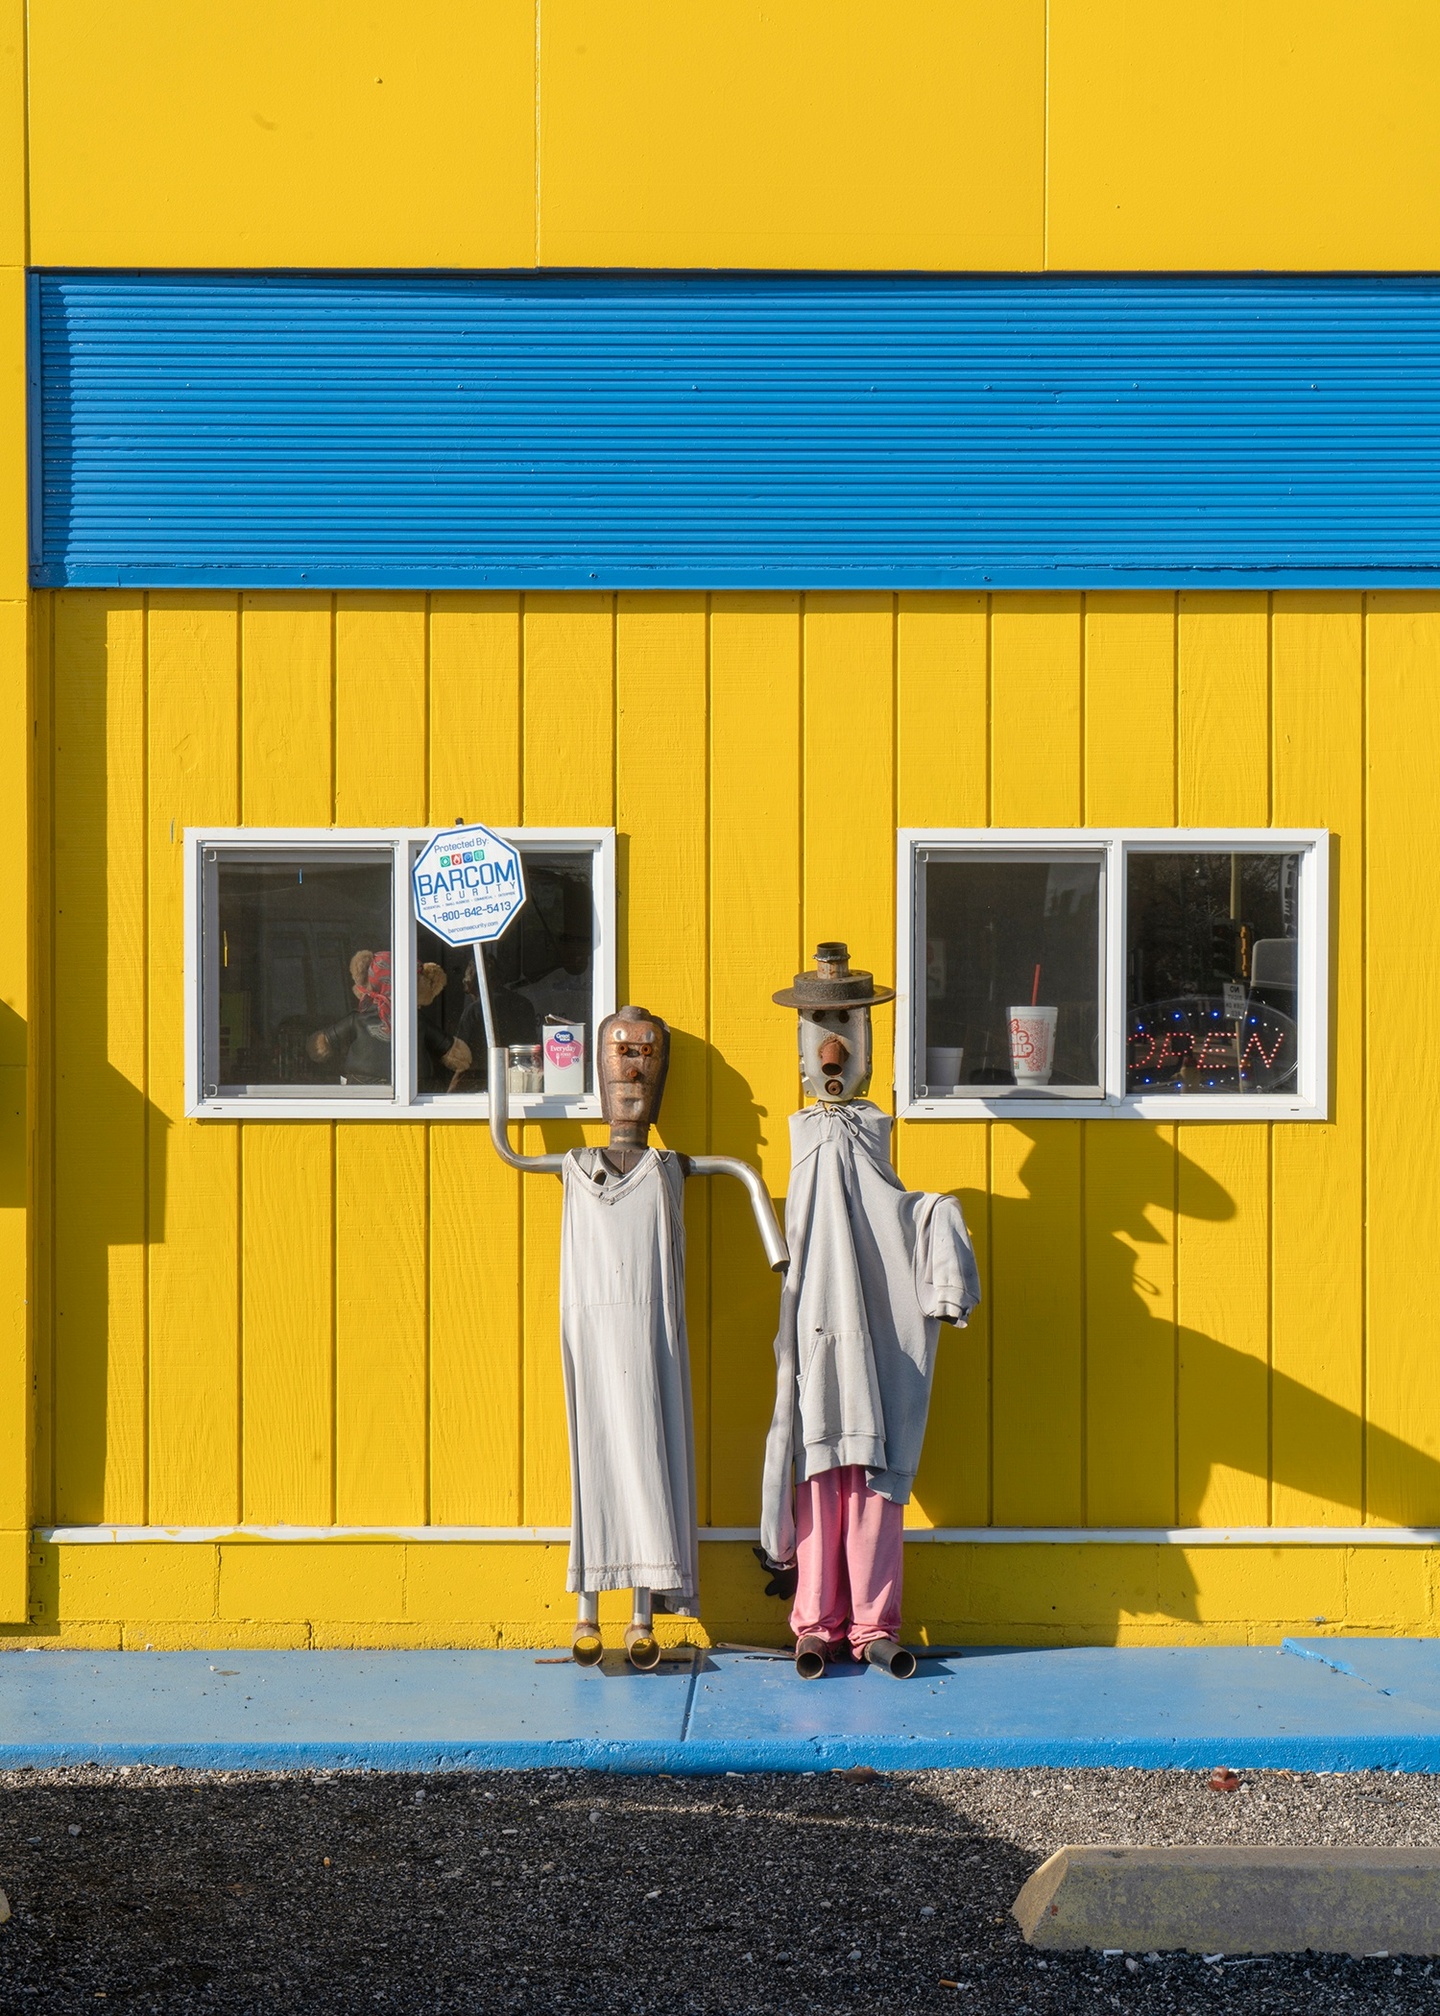 Exterior of a building with wood siding and small windows, painted bright yellow with blue accents. Two humanoid sculptures made of muffler parts dressed like a man and a woman are propped against the wall.